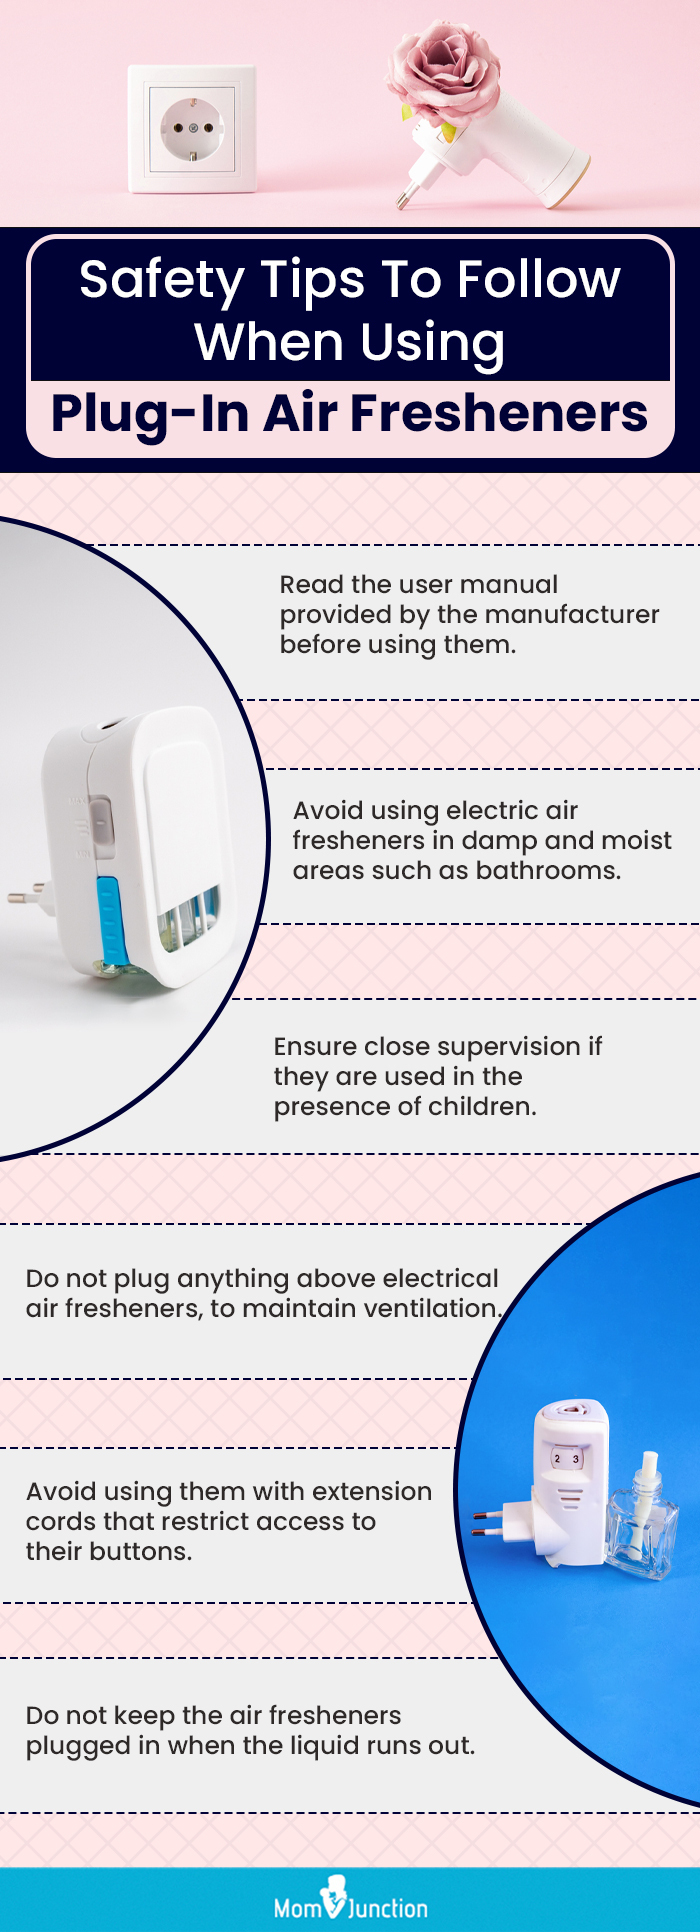 Safety Tips To Follow When Using Plug In Air Fresheners (infographic)